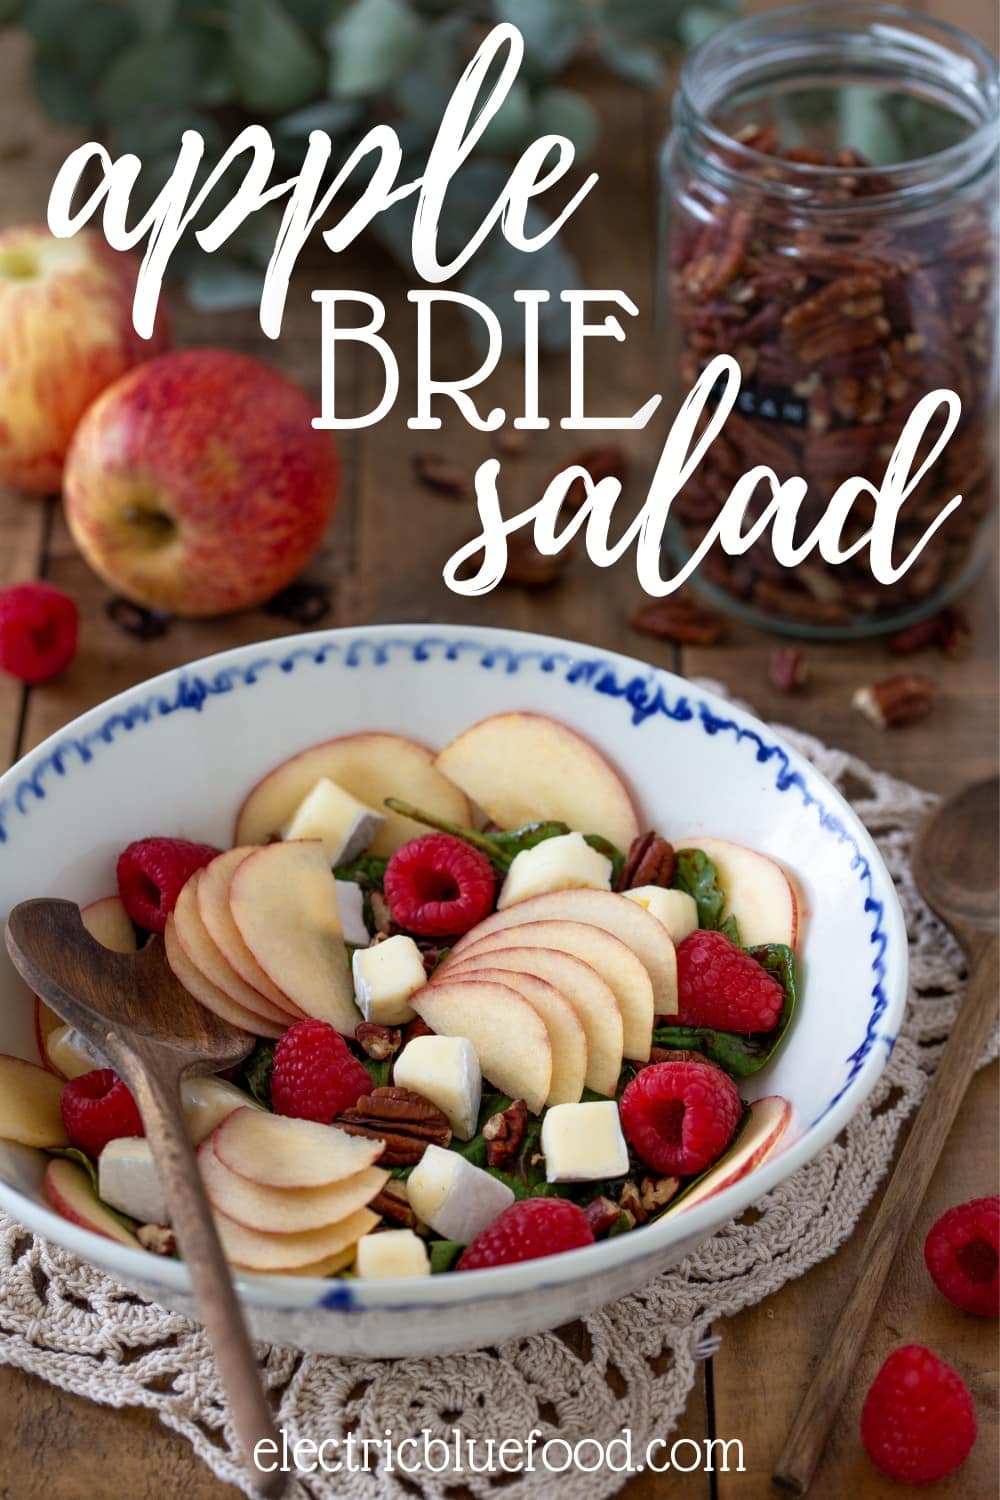 Apple brie salad with raspberries and pecans. A colourful salad with fresh fruits, nuts and a raspberry vinaigrette.